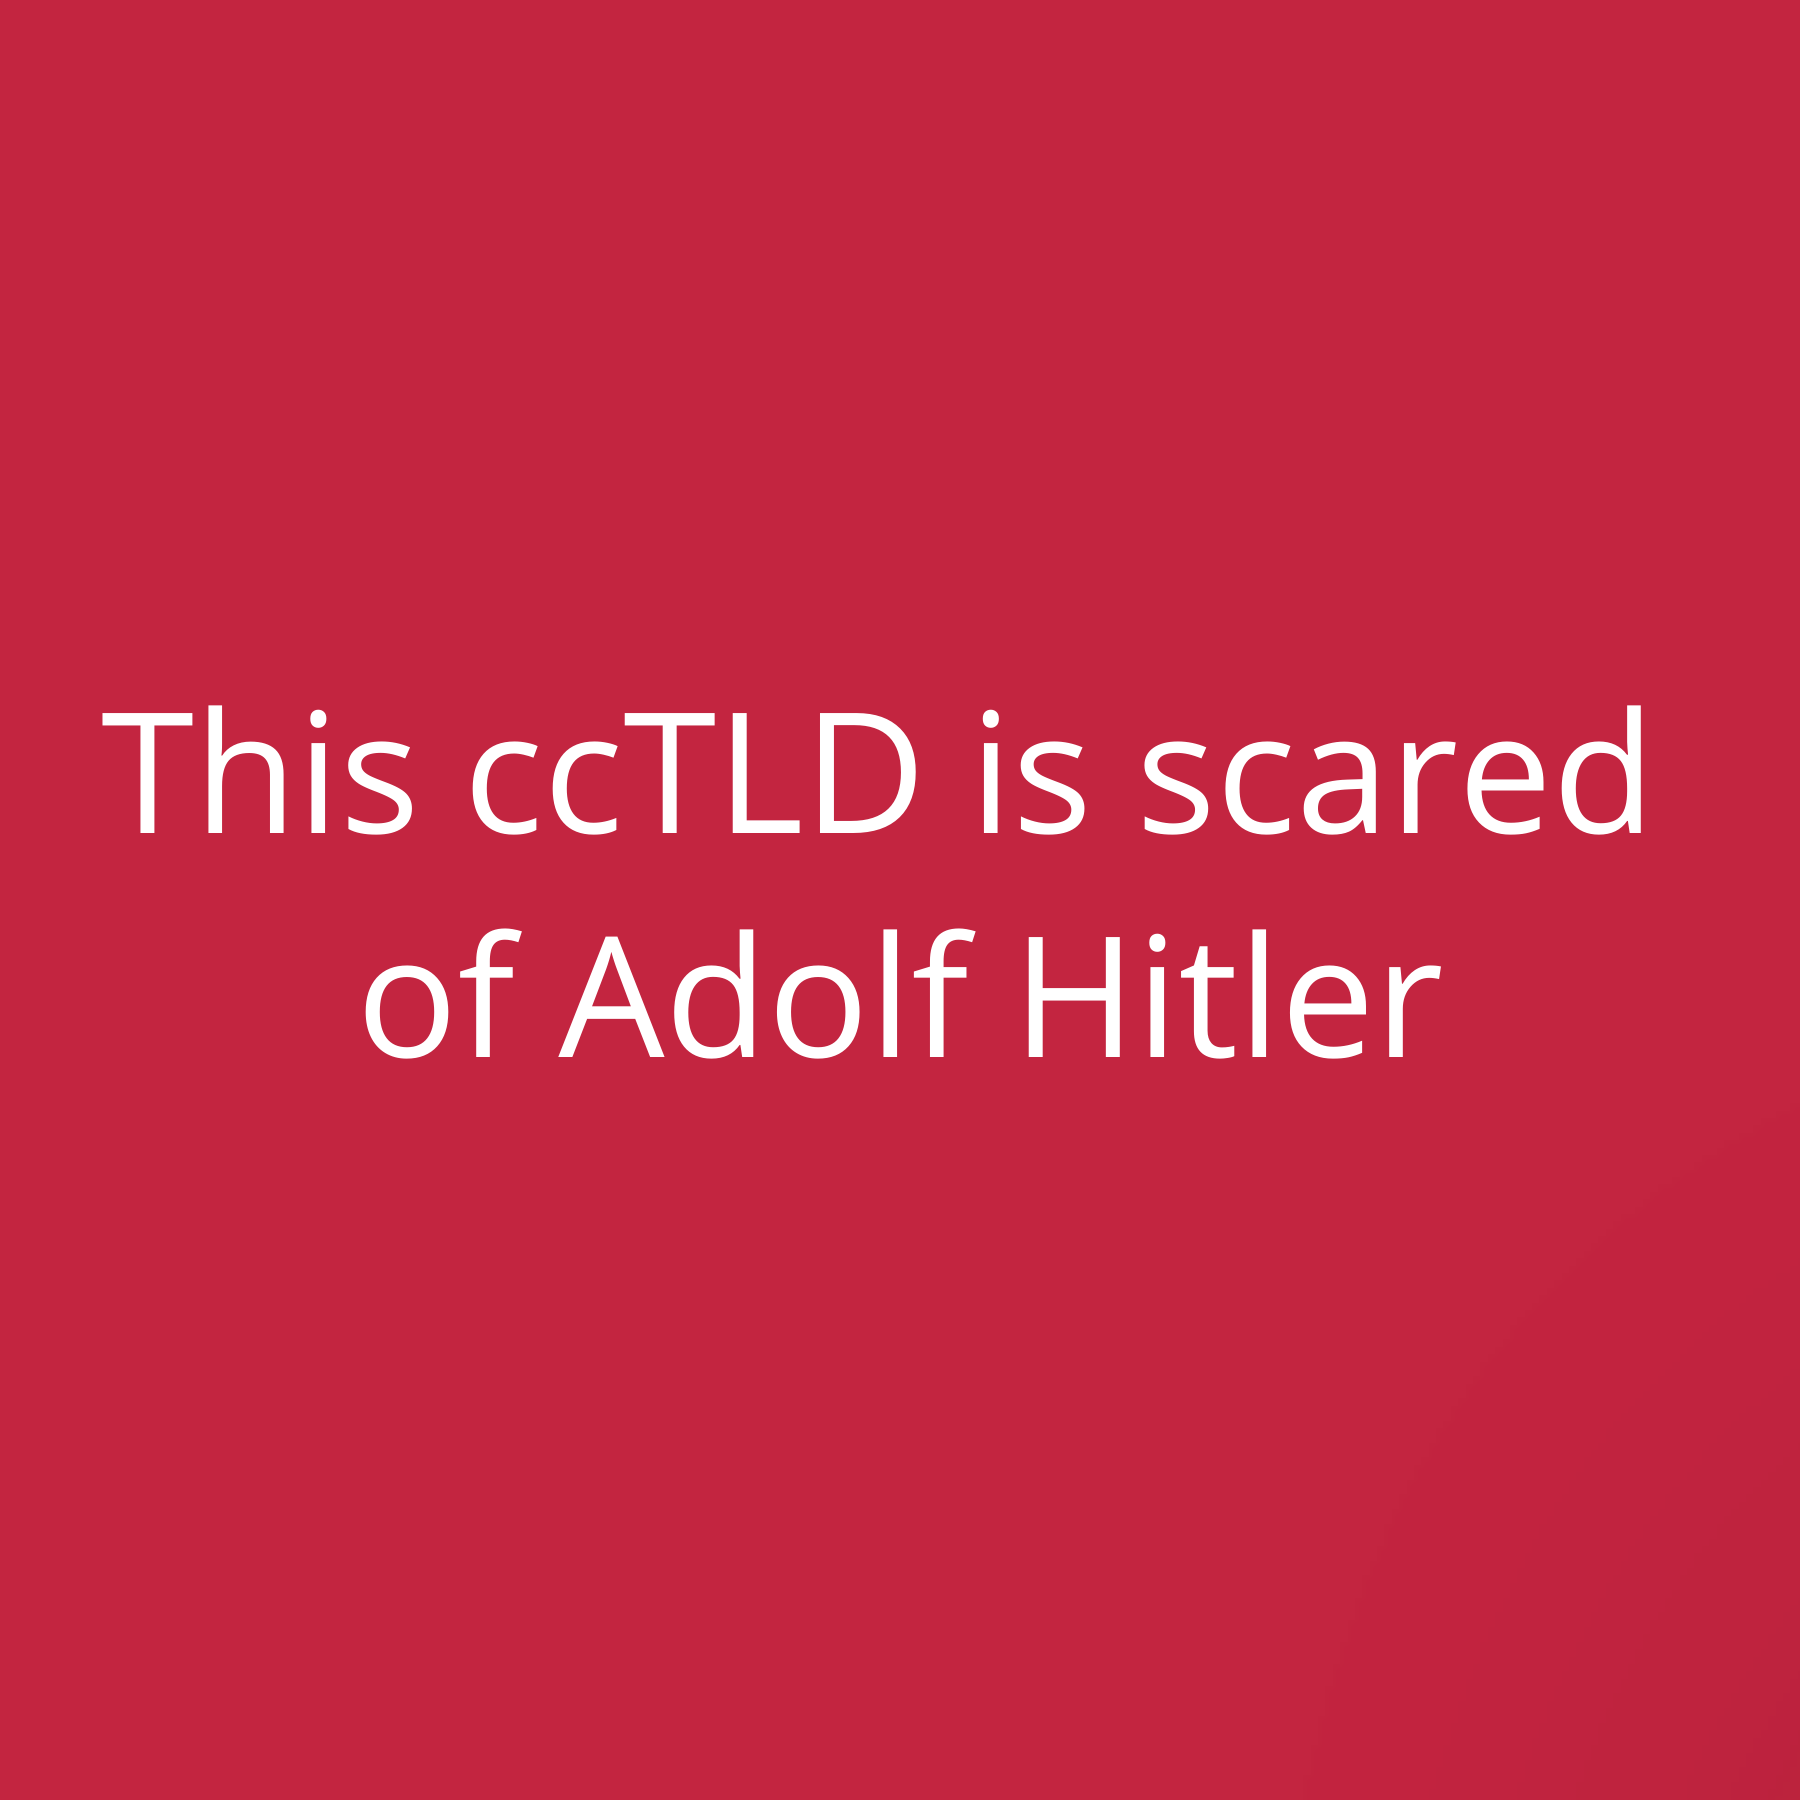 This ccTLD is scared of Adolf Hitler